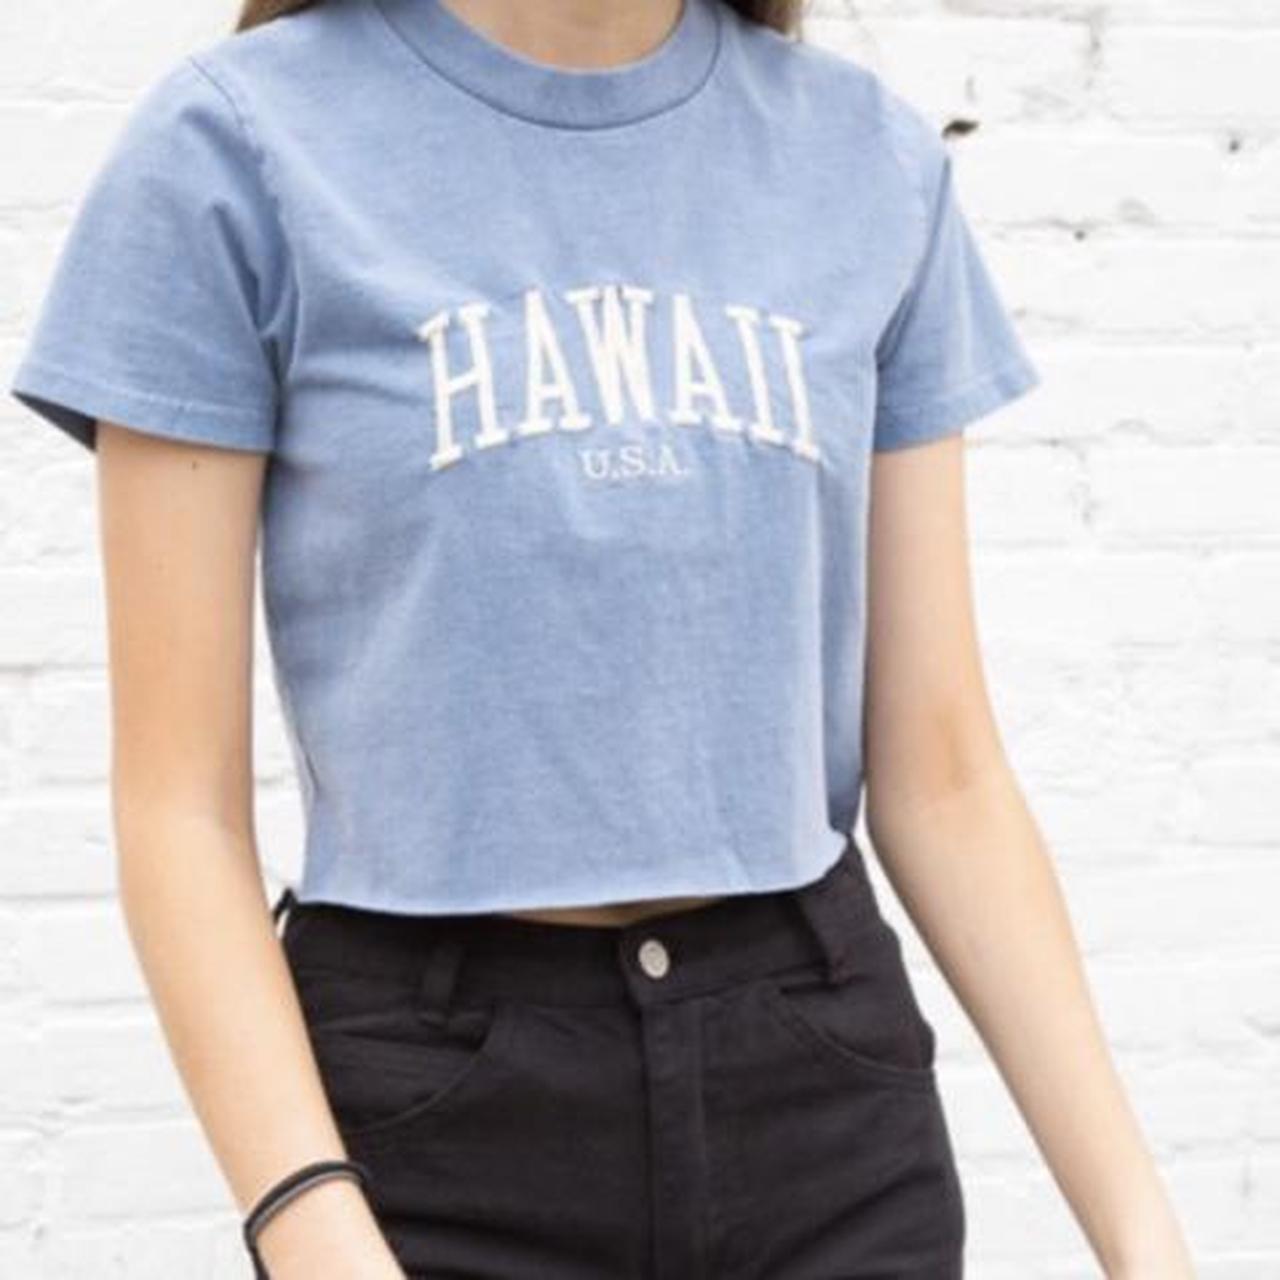 helen hawaii usa top ribbed cotton tee in washed - Depop